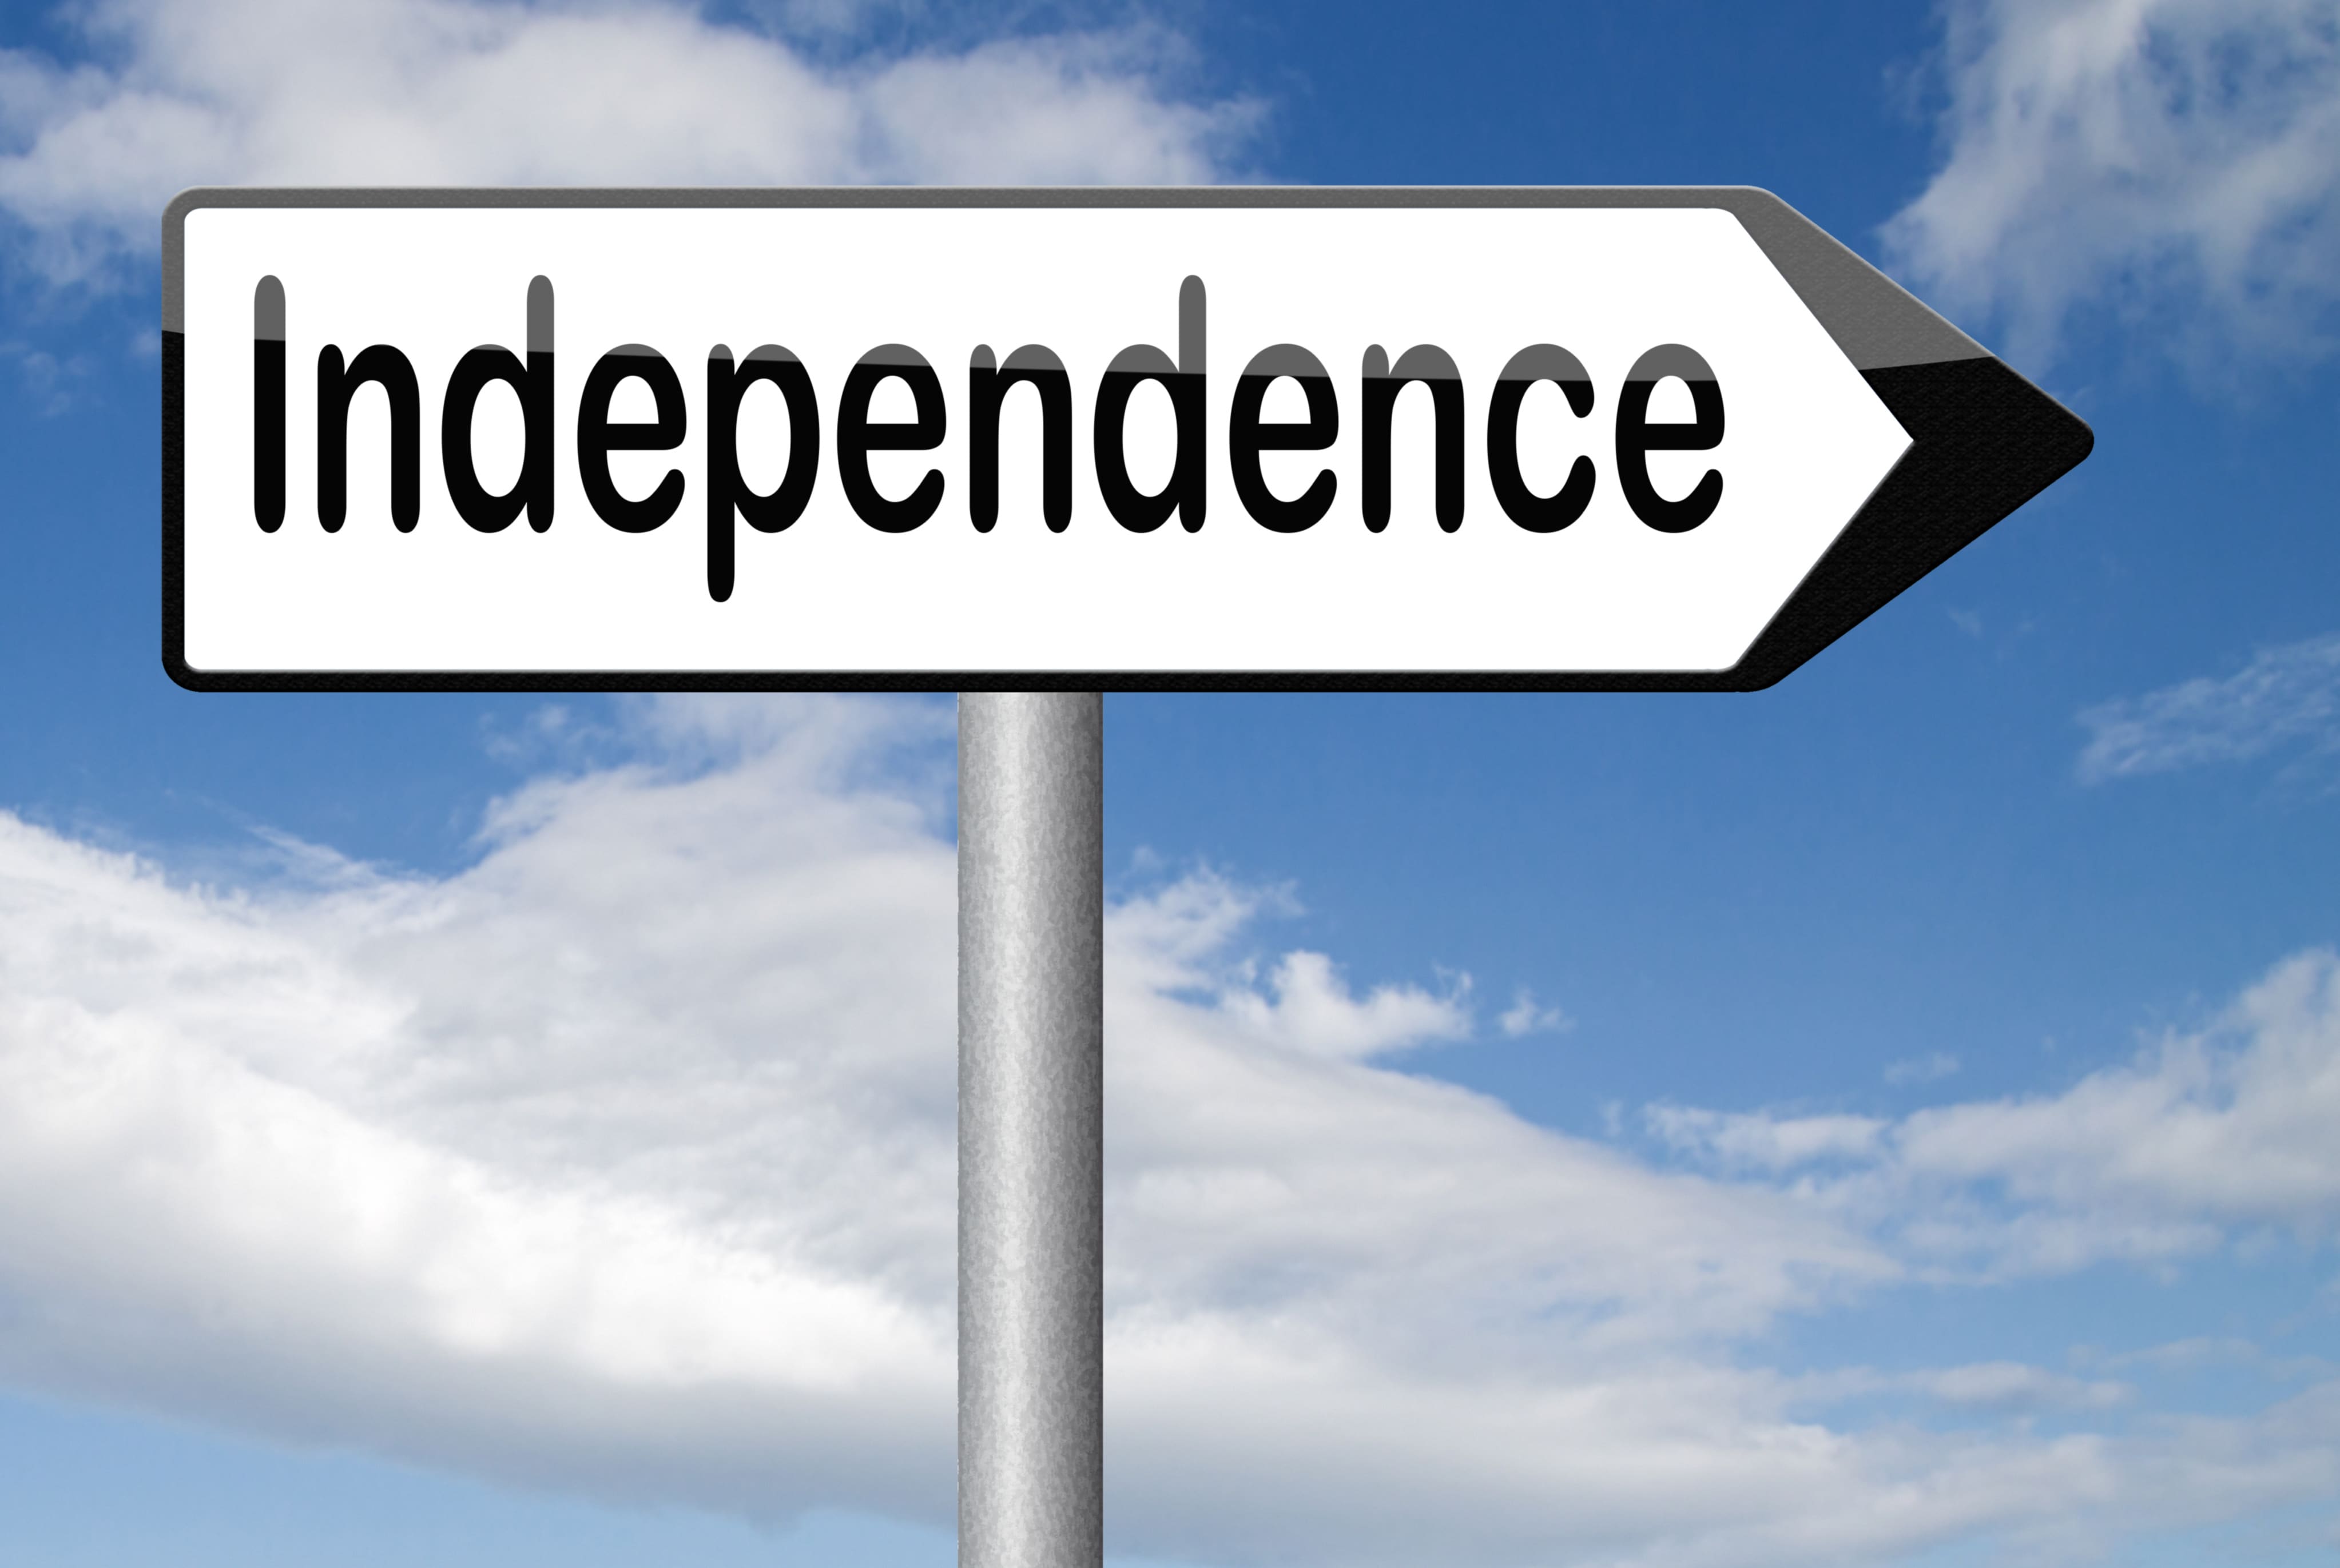 Uncollected prior year fees affect your independence